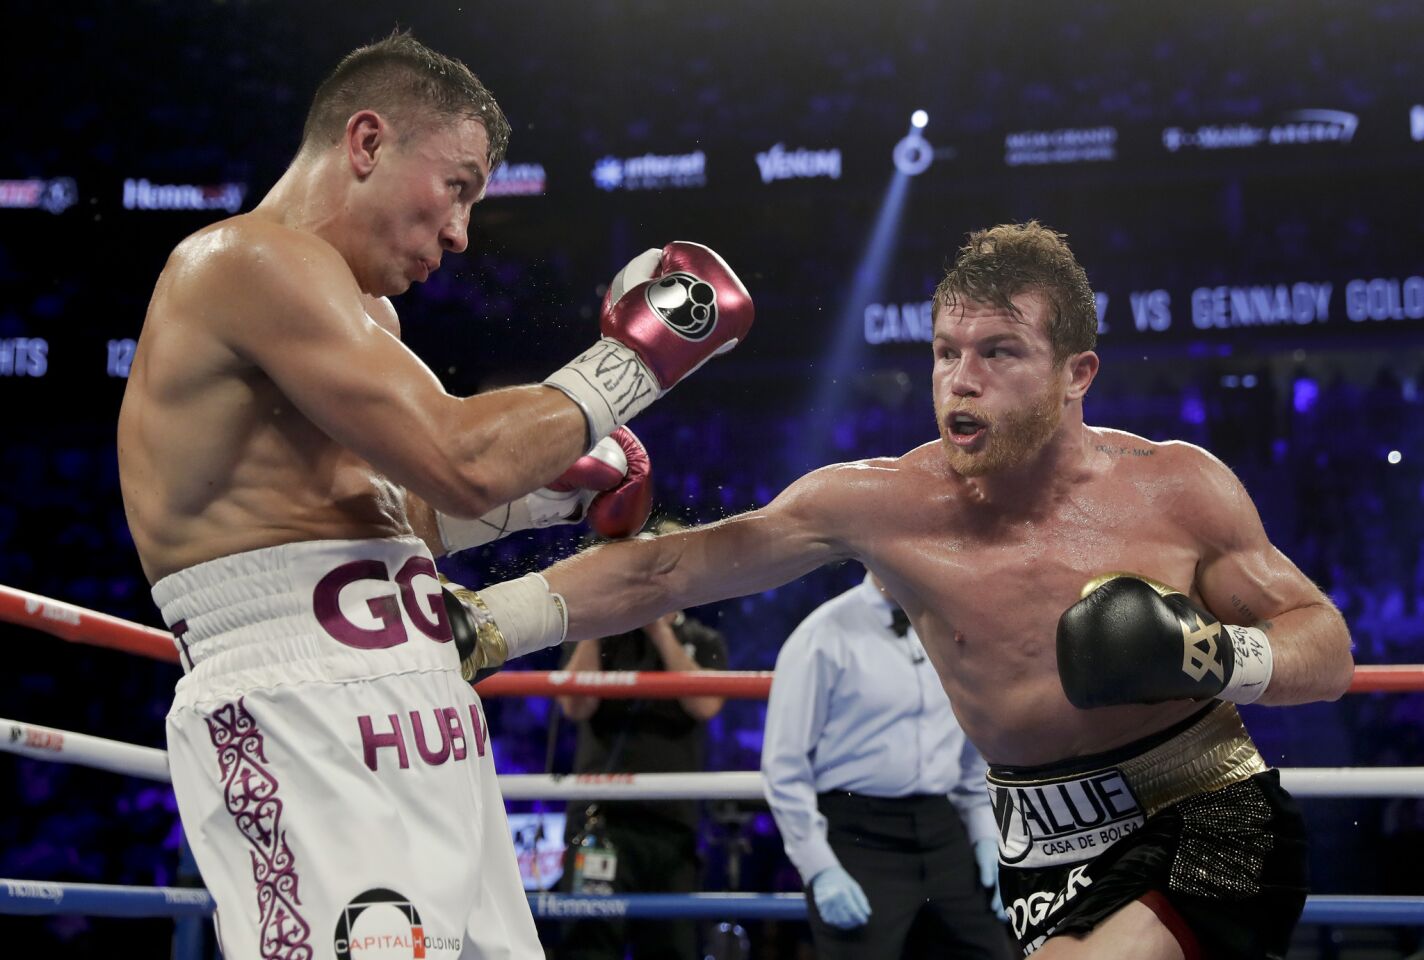 Canelo Alvarez, right, and Gennady Golovkin trade punches in the fourth round during a middleweight title boxing match, Saturday, Sept. 15, 2018, in Las Vegas.